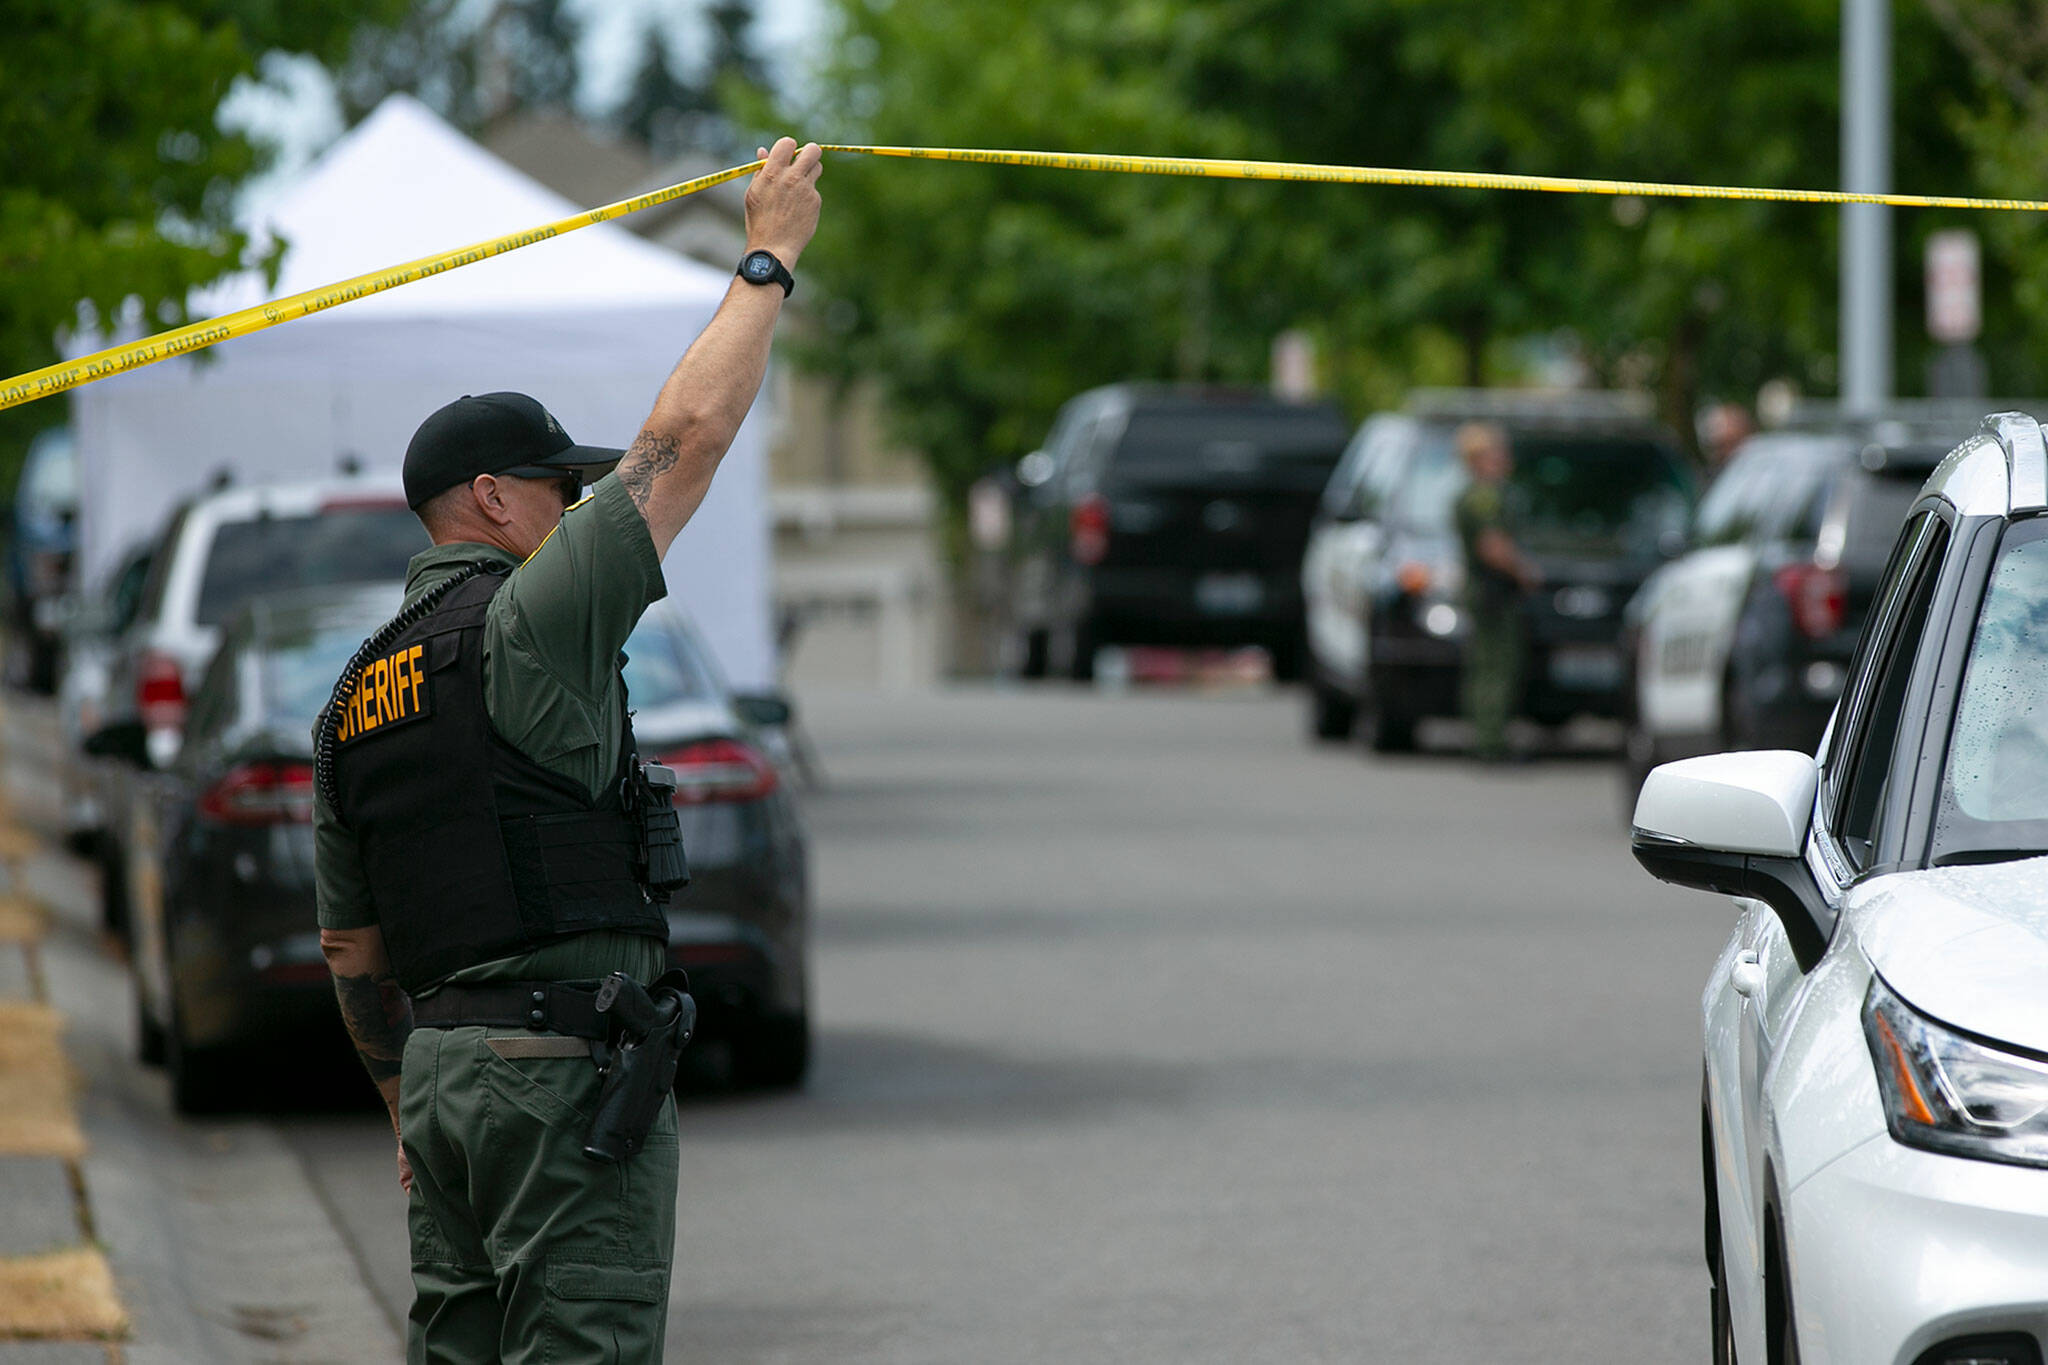 A sheriff’s deputy lets a vehicle pass police tape as law enforcement work on 96th Street SE where an overnight home invasion resulted in one person being killed on Friday, Aug. 19, in Everett. (Ryan Berry / The Herald)